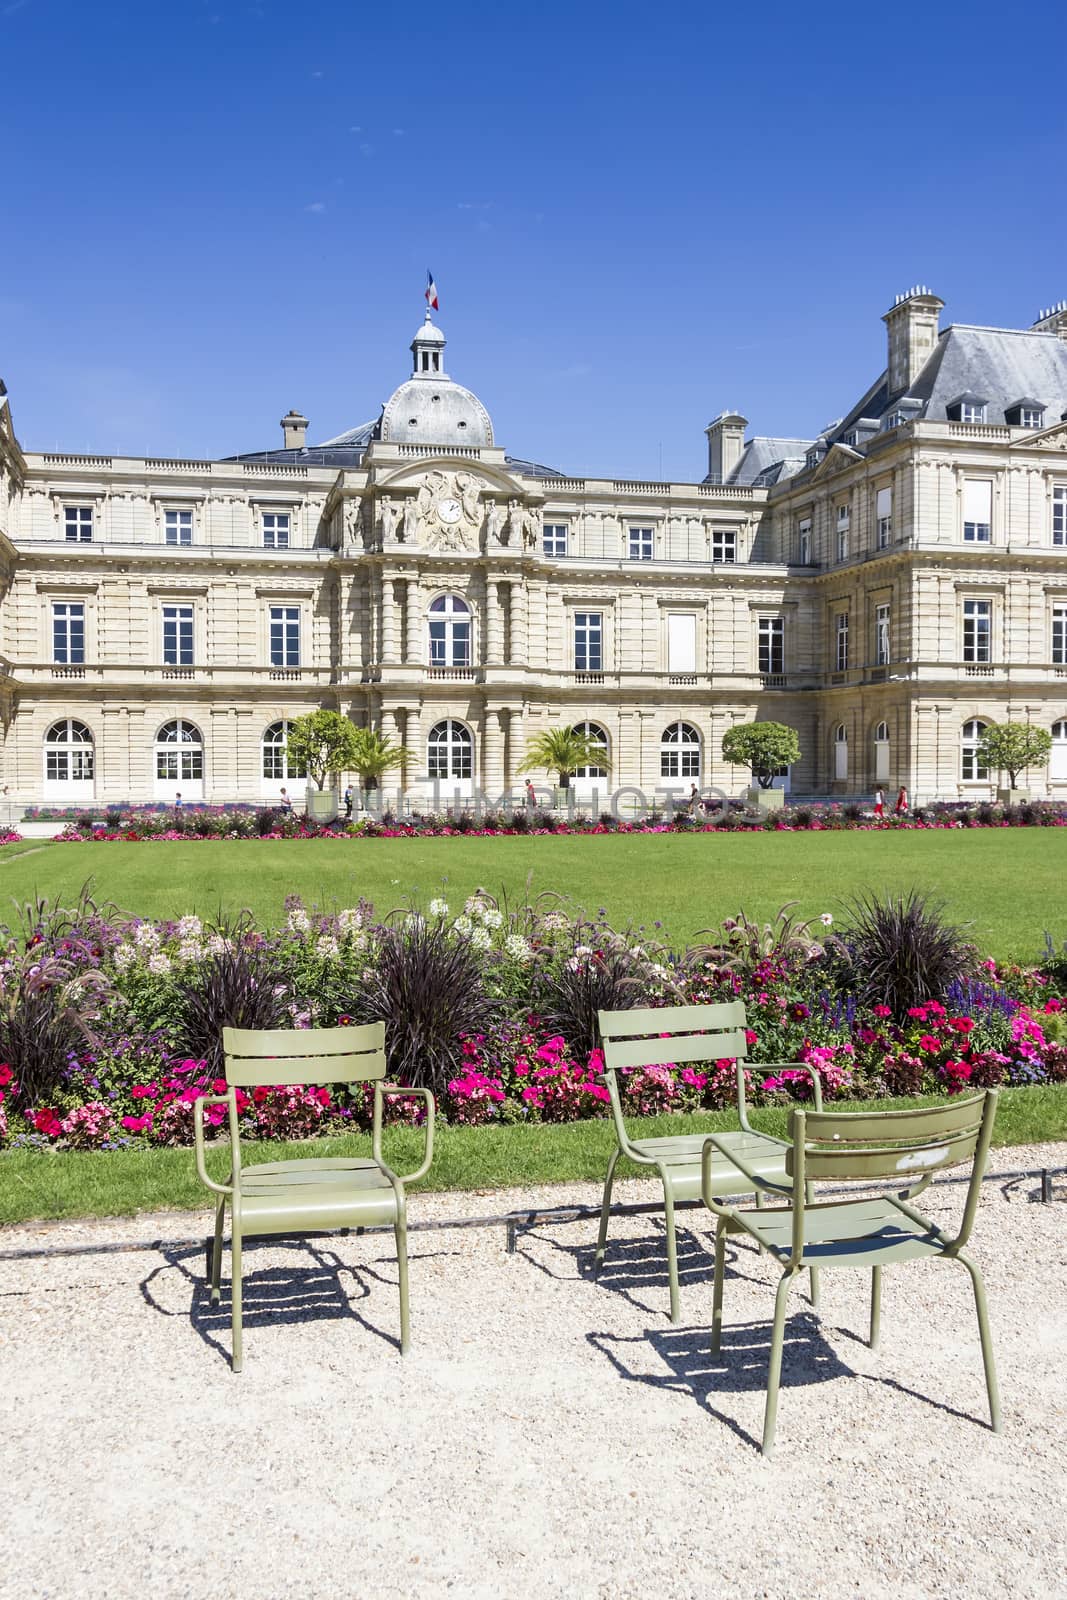 Palais Luxembourg, Paris, France by Tetyana